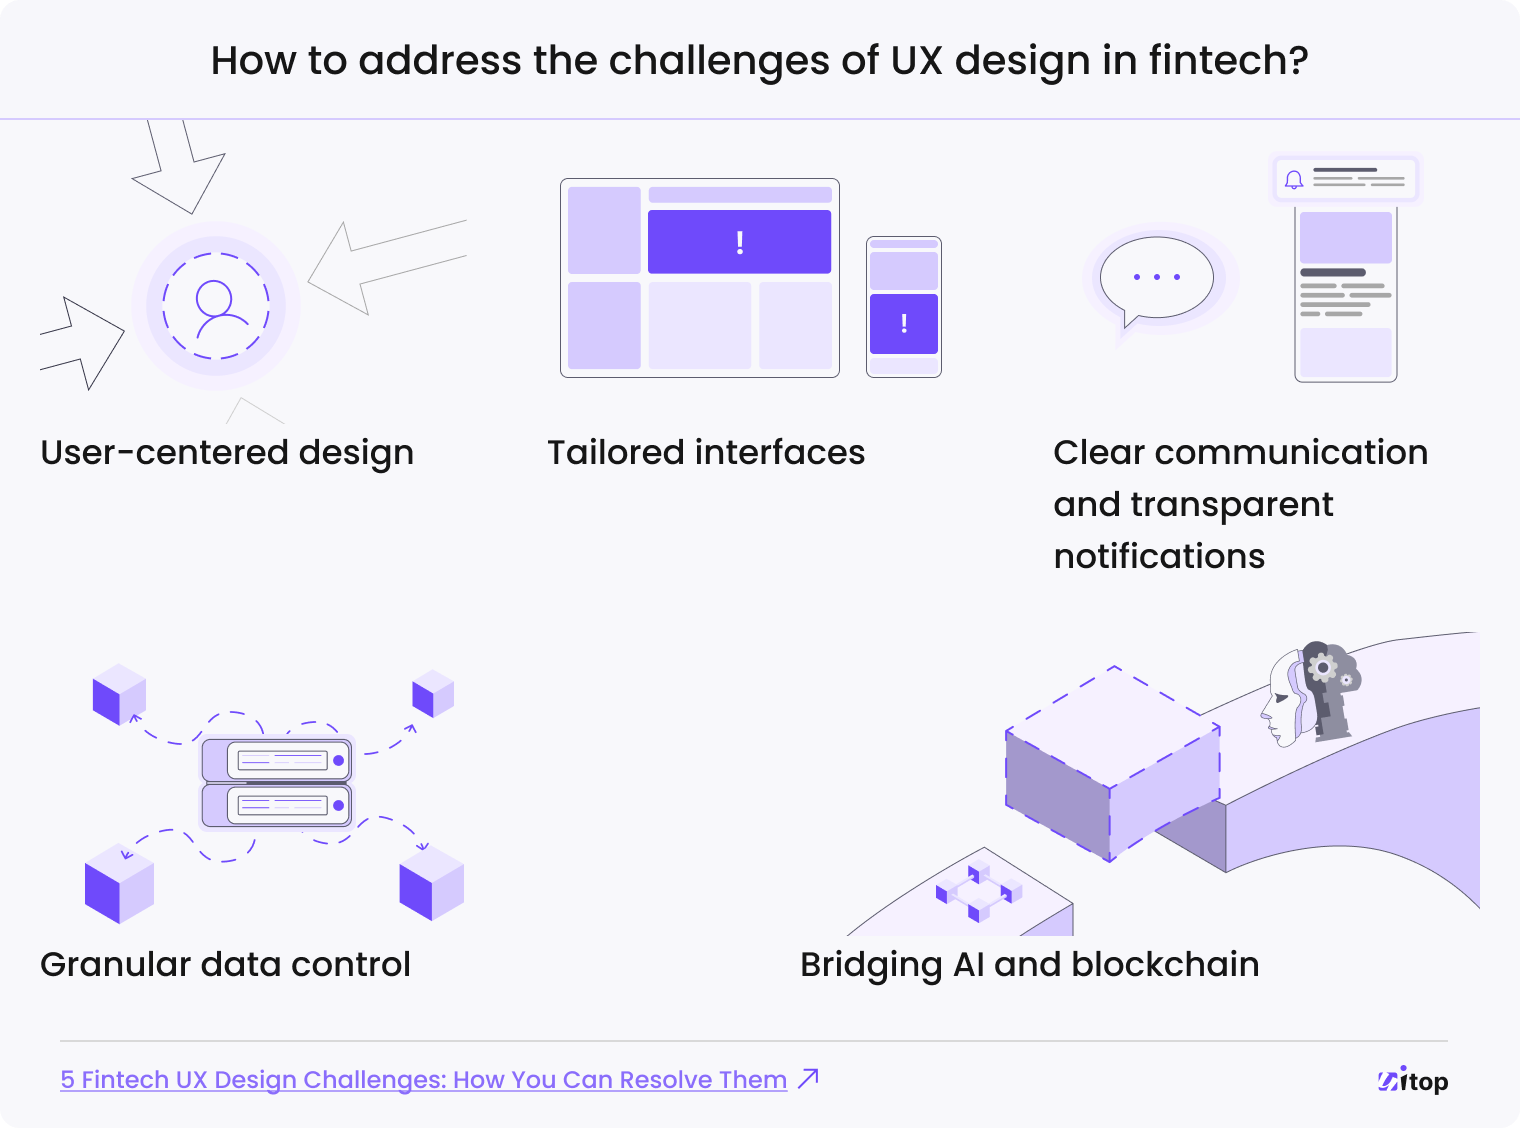 the challenges of UX design in fintech